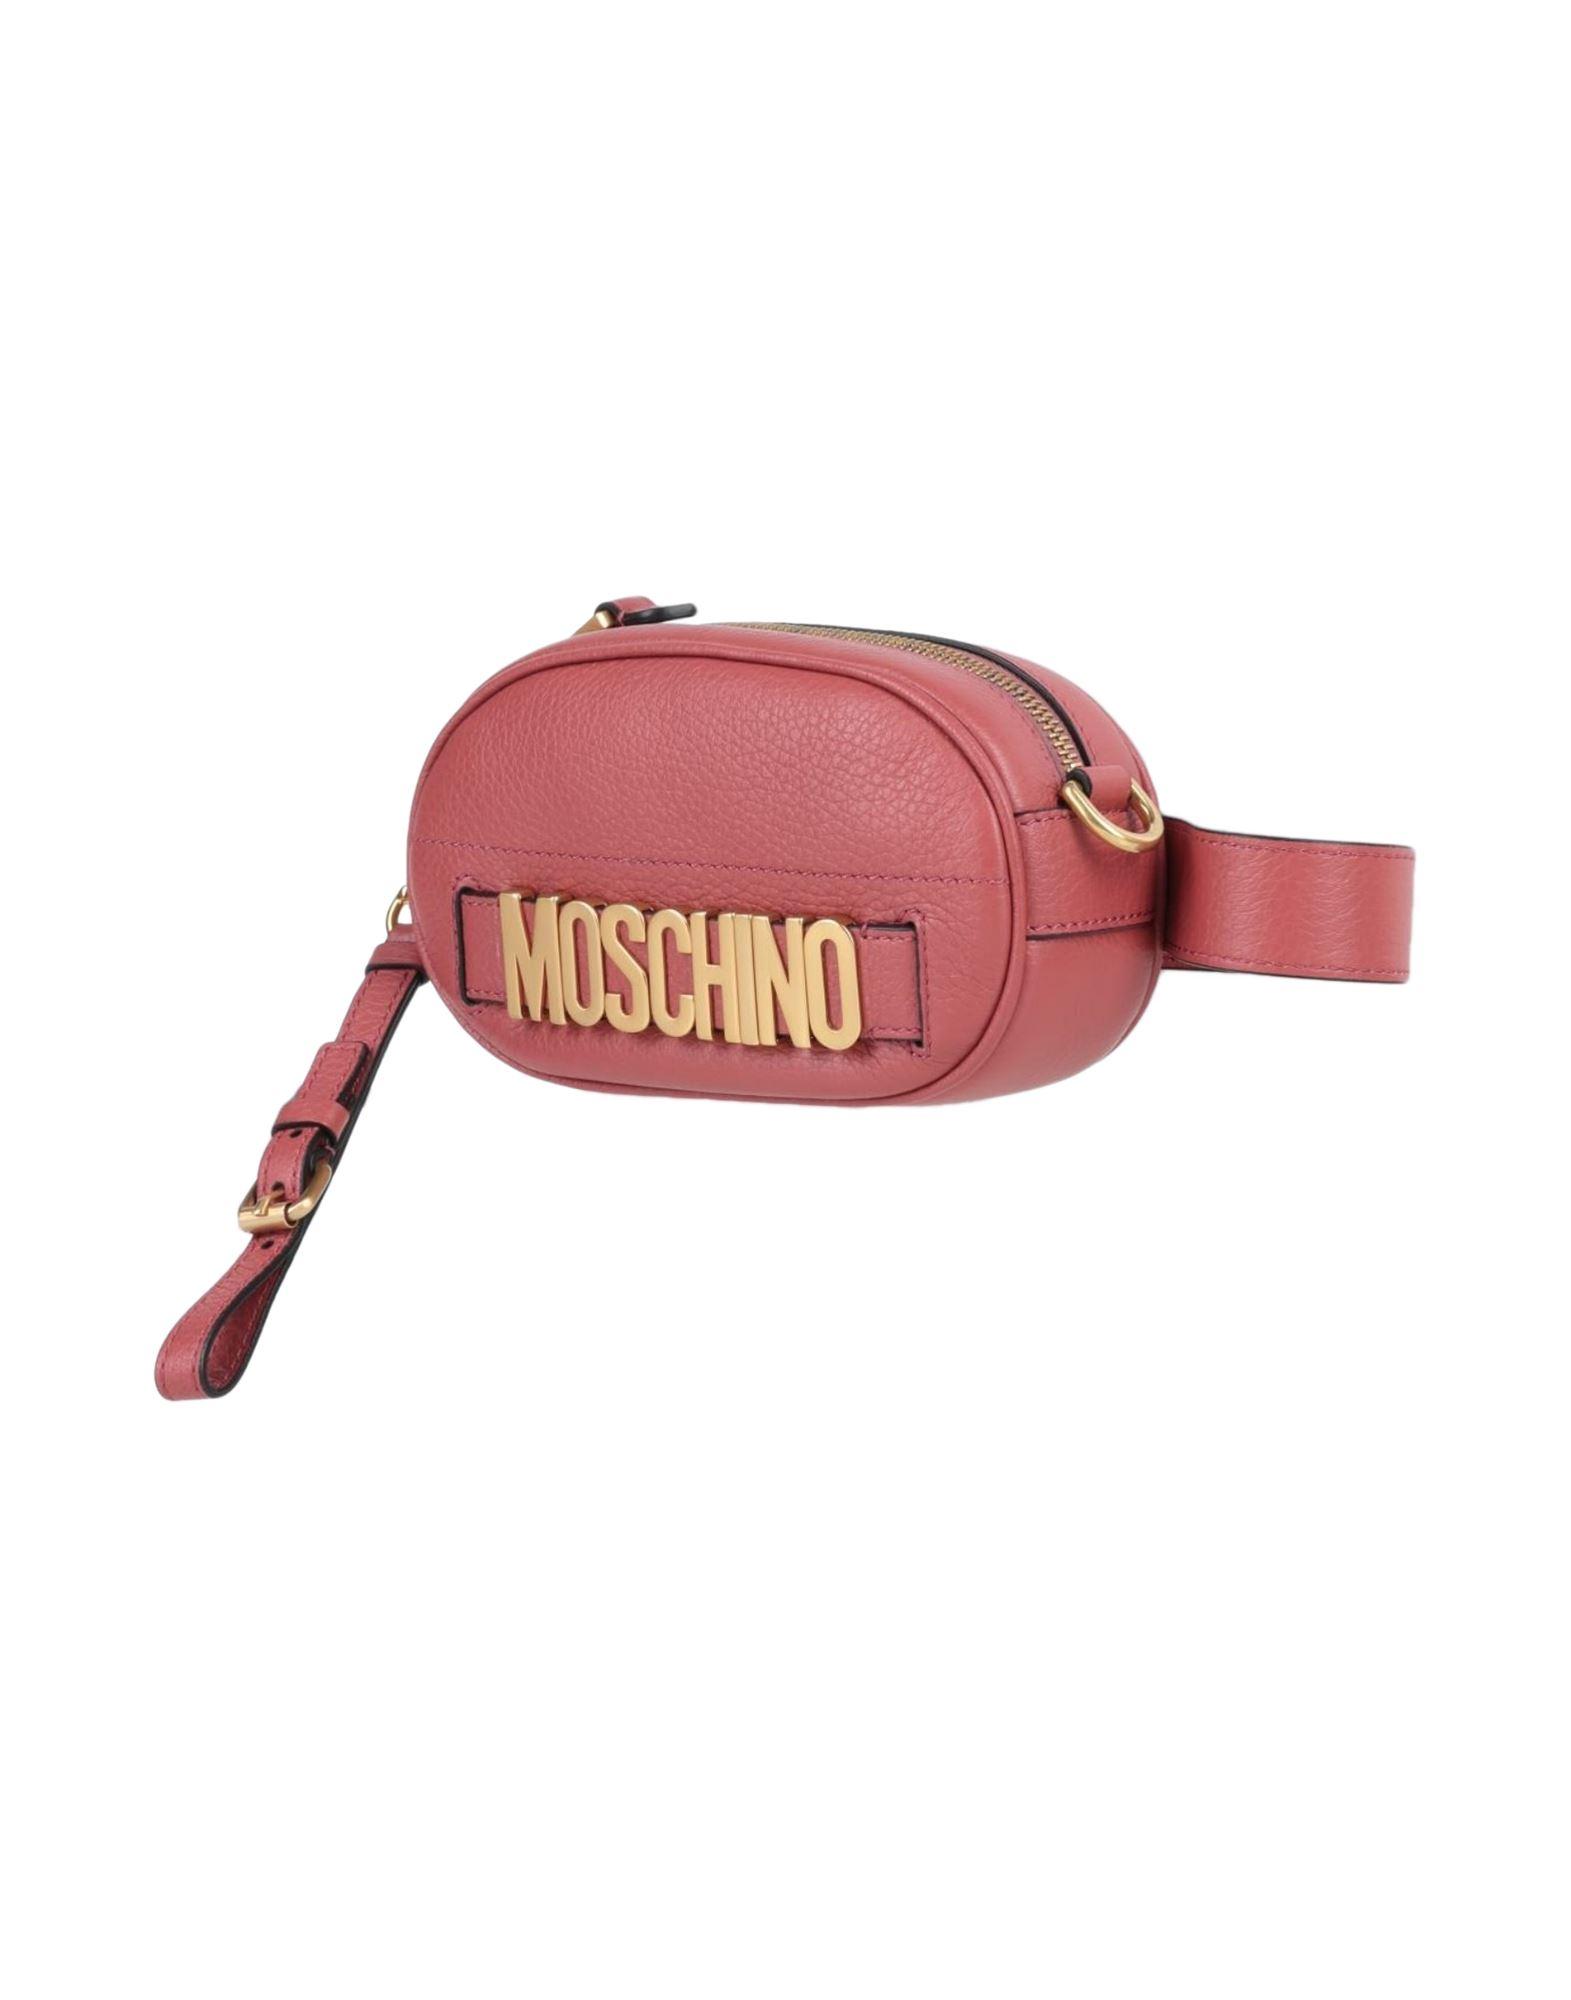 Moschino Bum Bag in Brown | Lyst